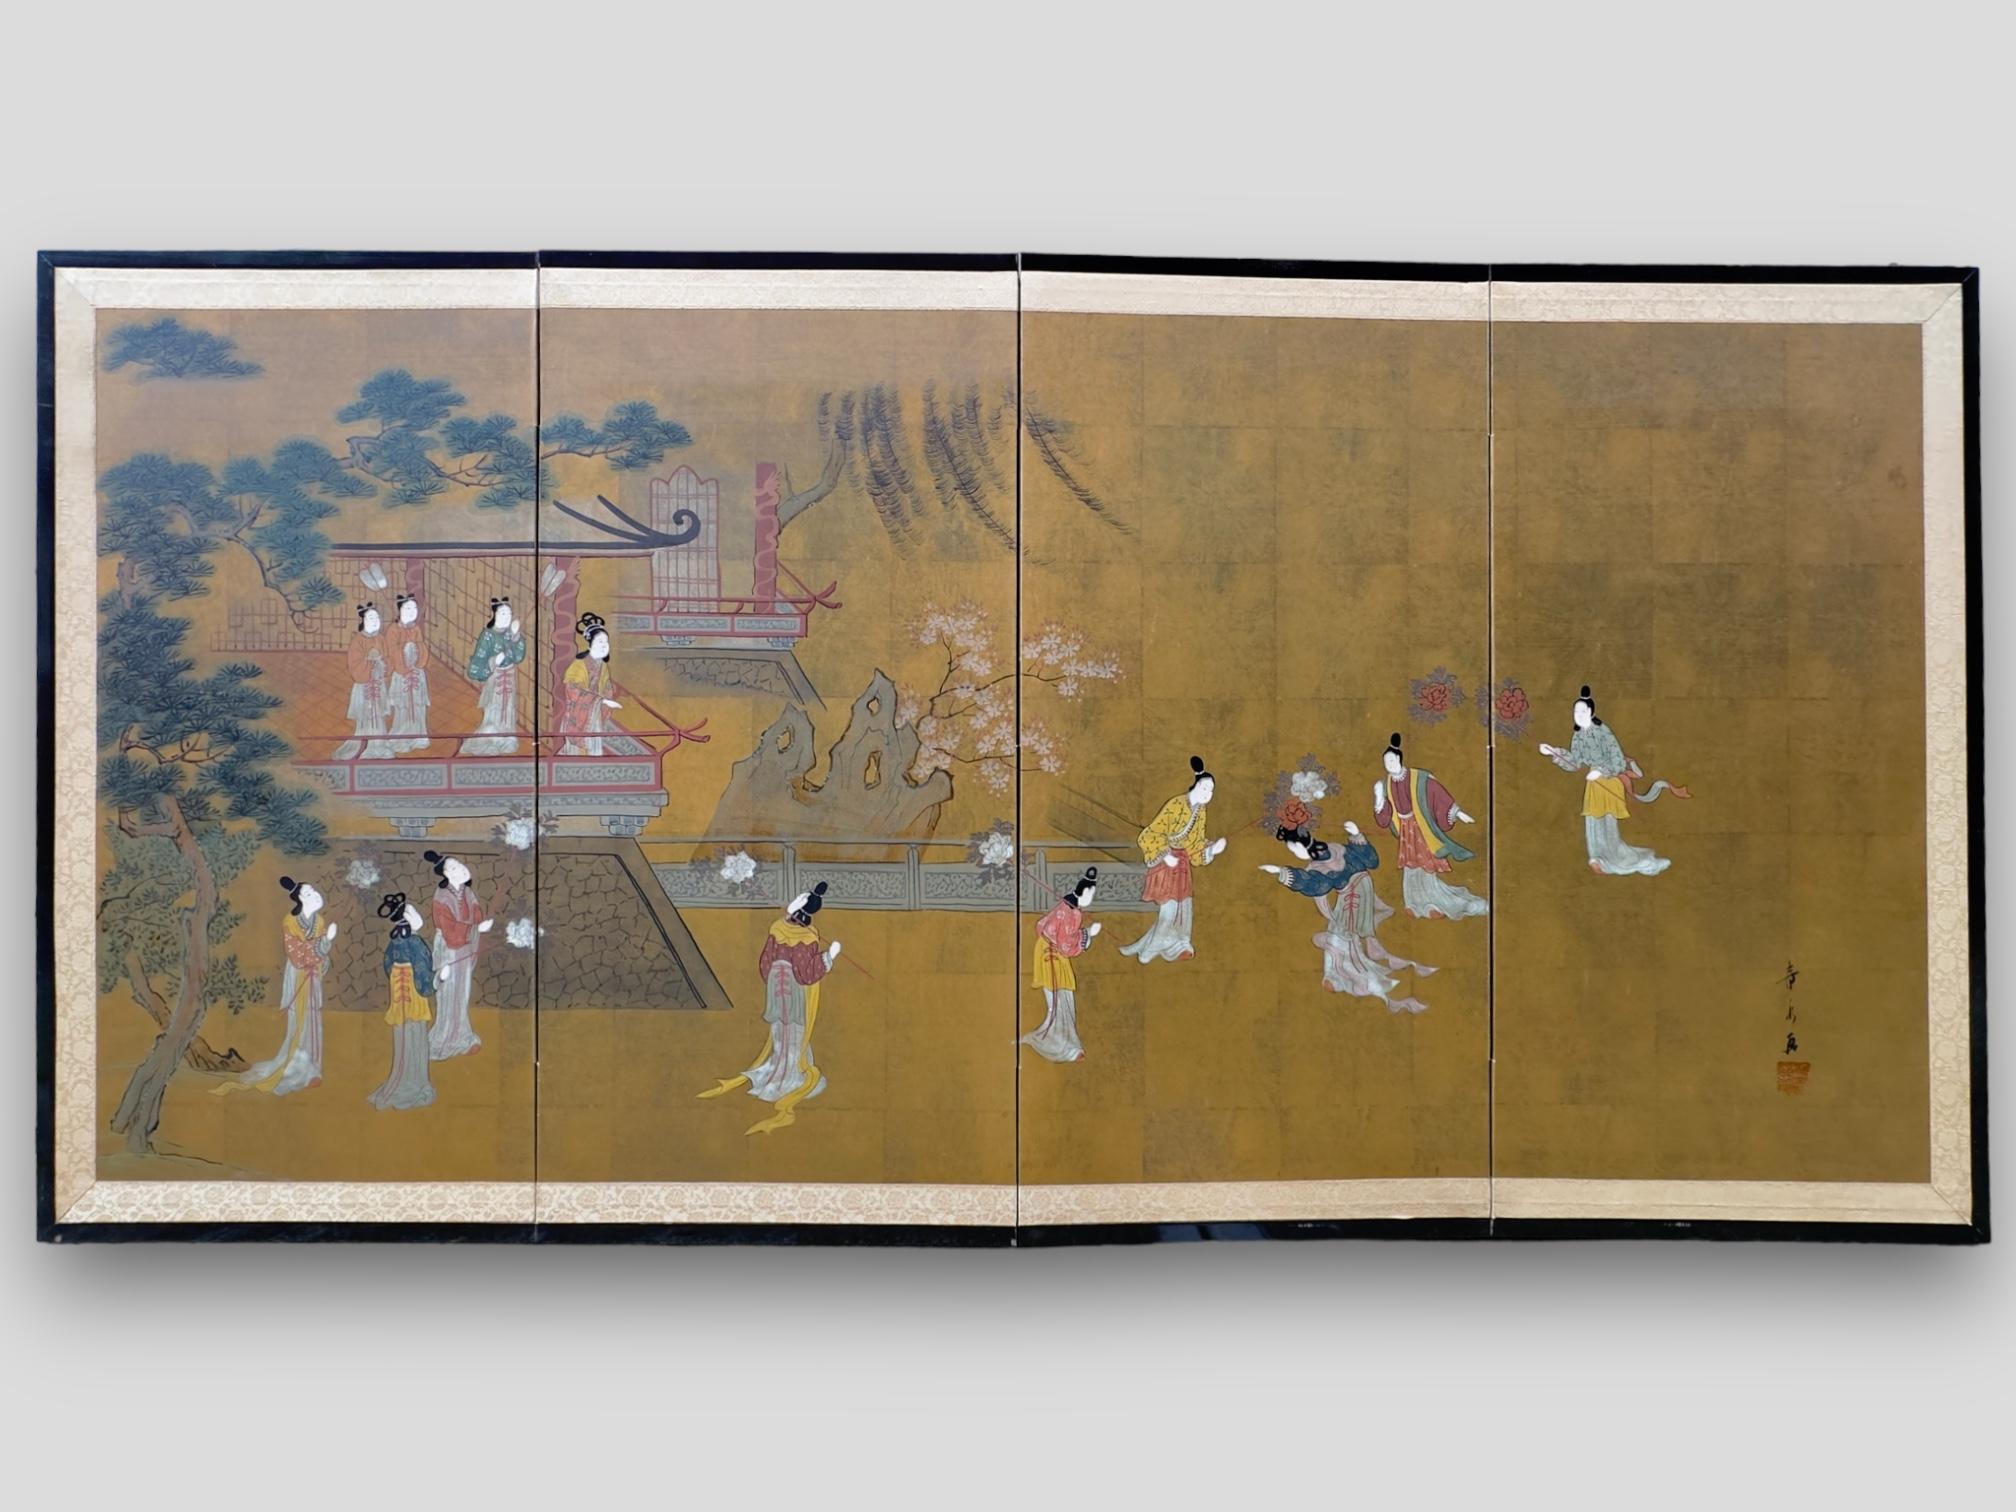 Japanese 4 Panels Court with 13 Ladies in the Garden. Taisho Period (7/30/1912 - 12/25/1926.(Coinciding with the reign of Emperor Taisho). Circa 1920. Painted on Rice Paper. 71